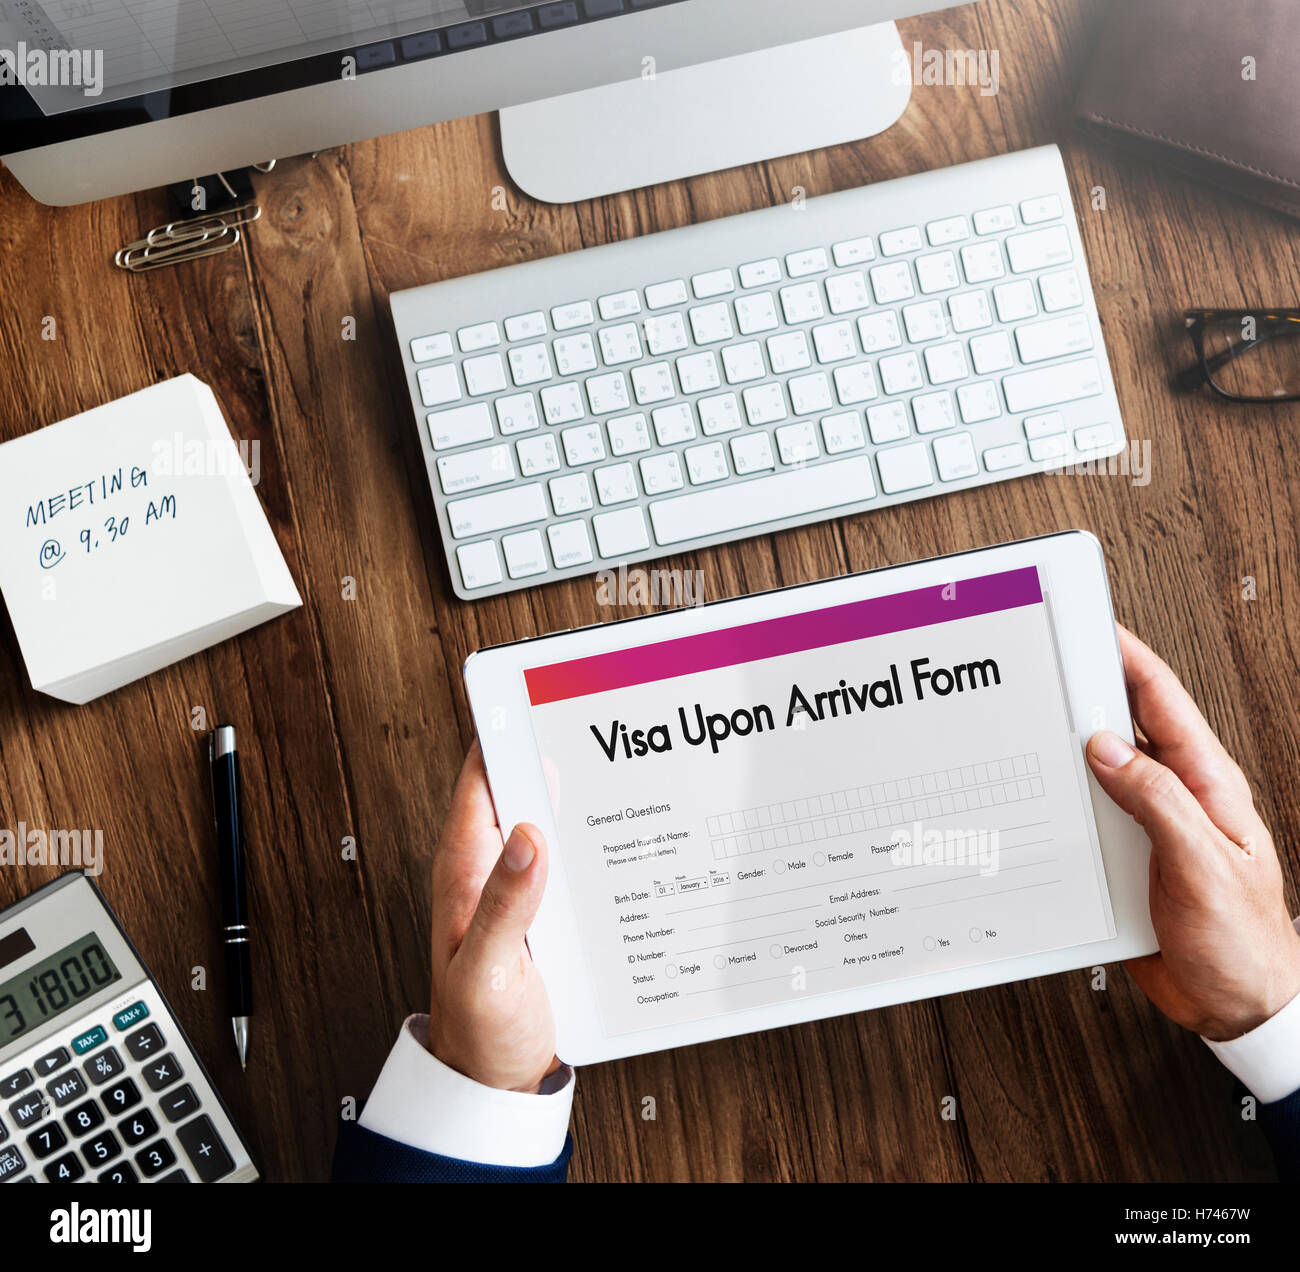 Visa Upon Arrival Form Concept Stock Photo